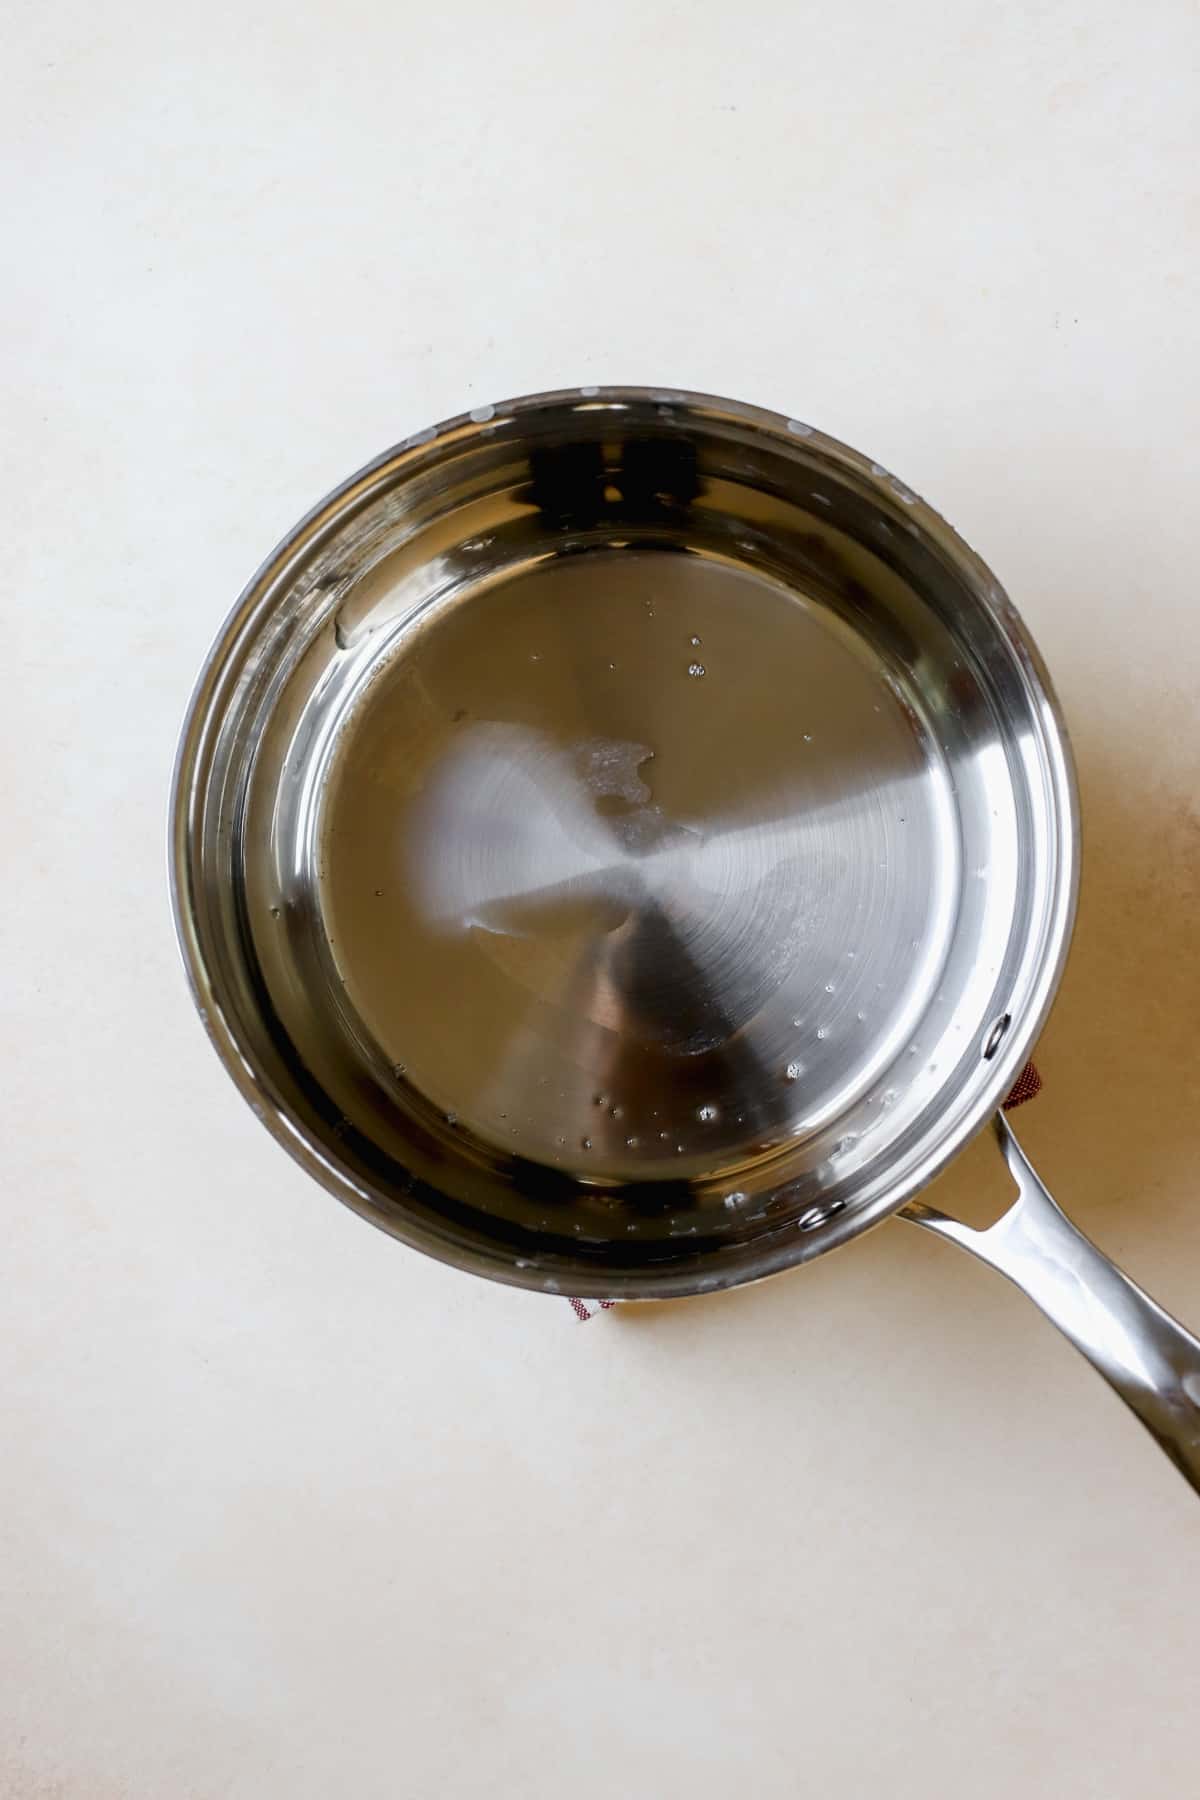 Coconut oil heating up in medium-sized stainless steel saucepan